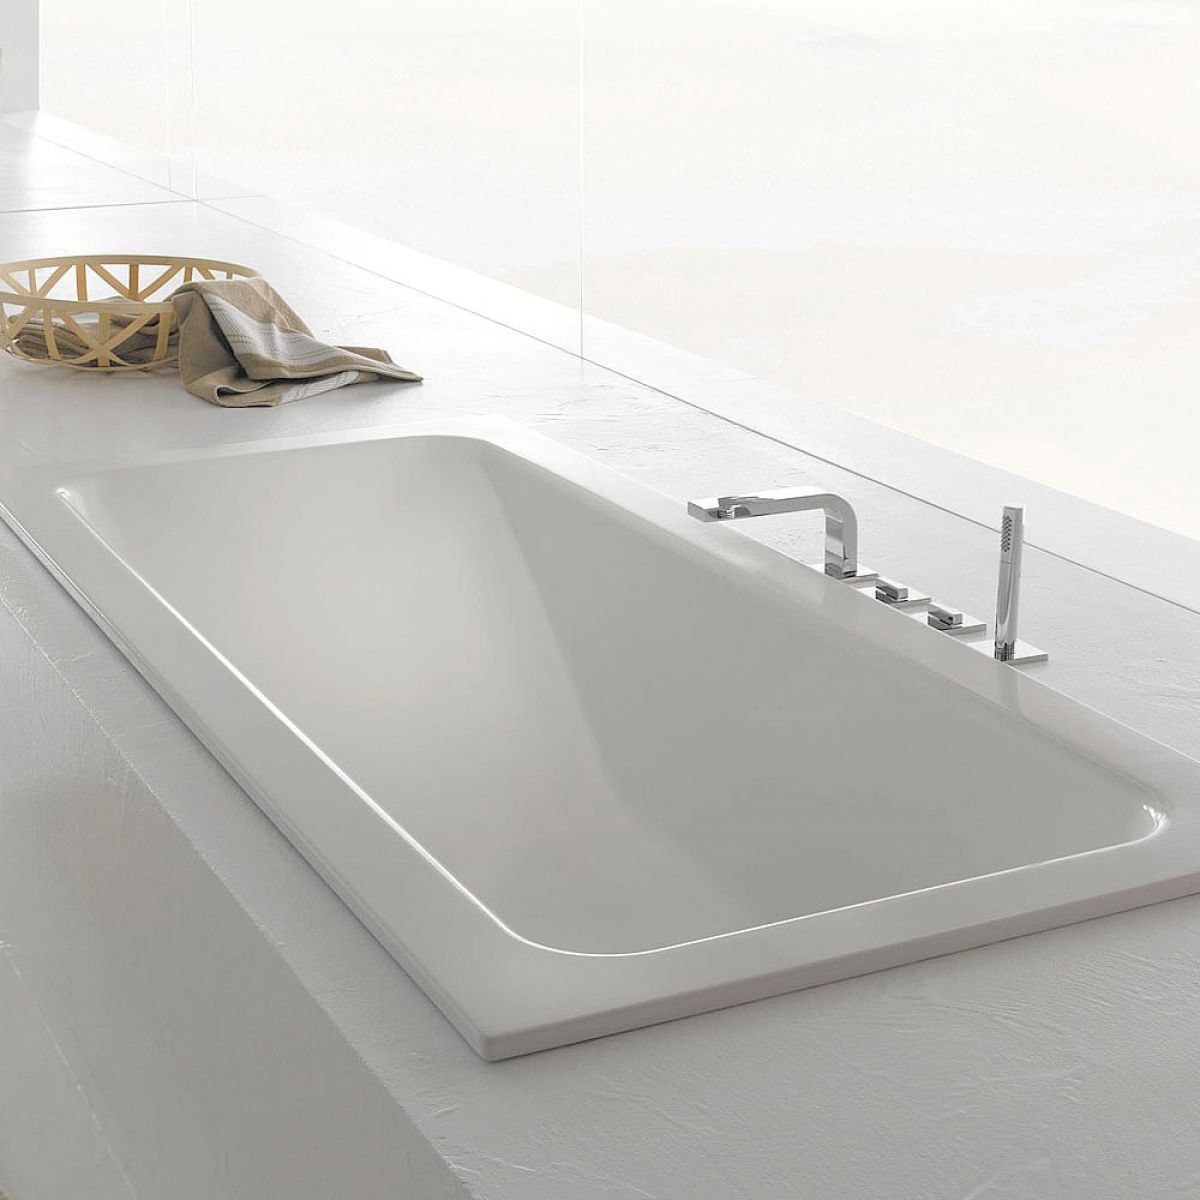 image example of a steel bath